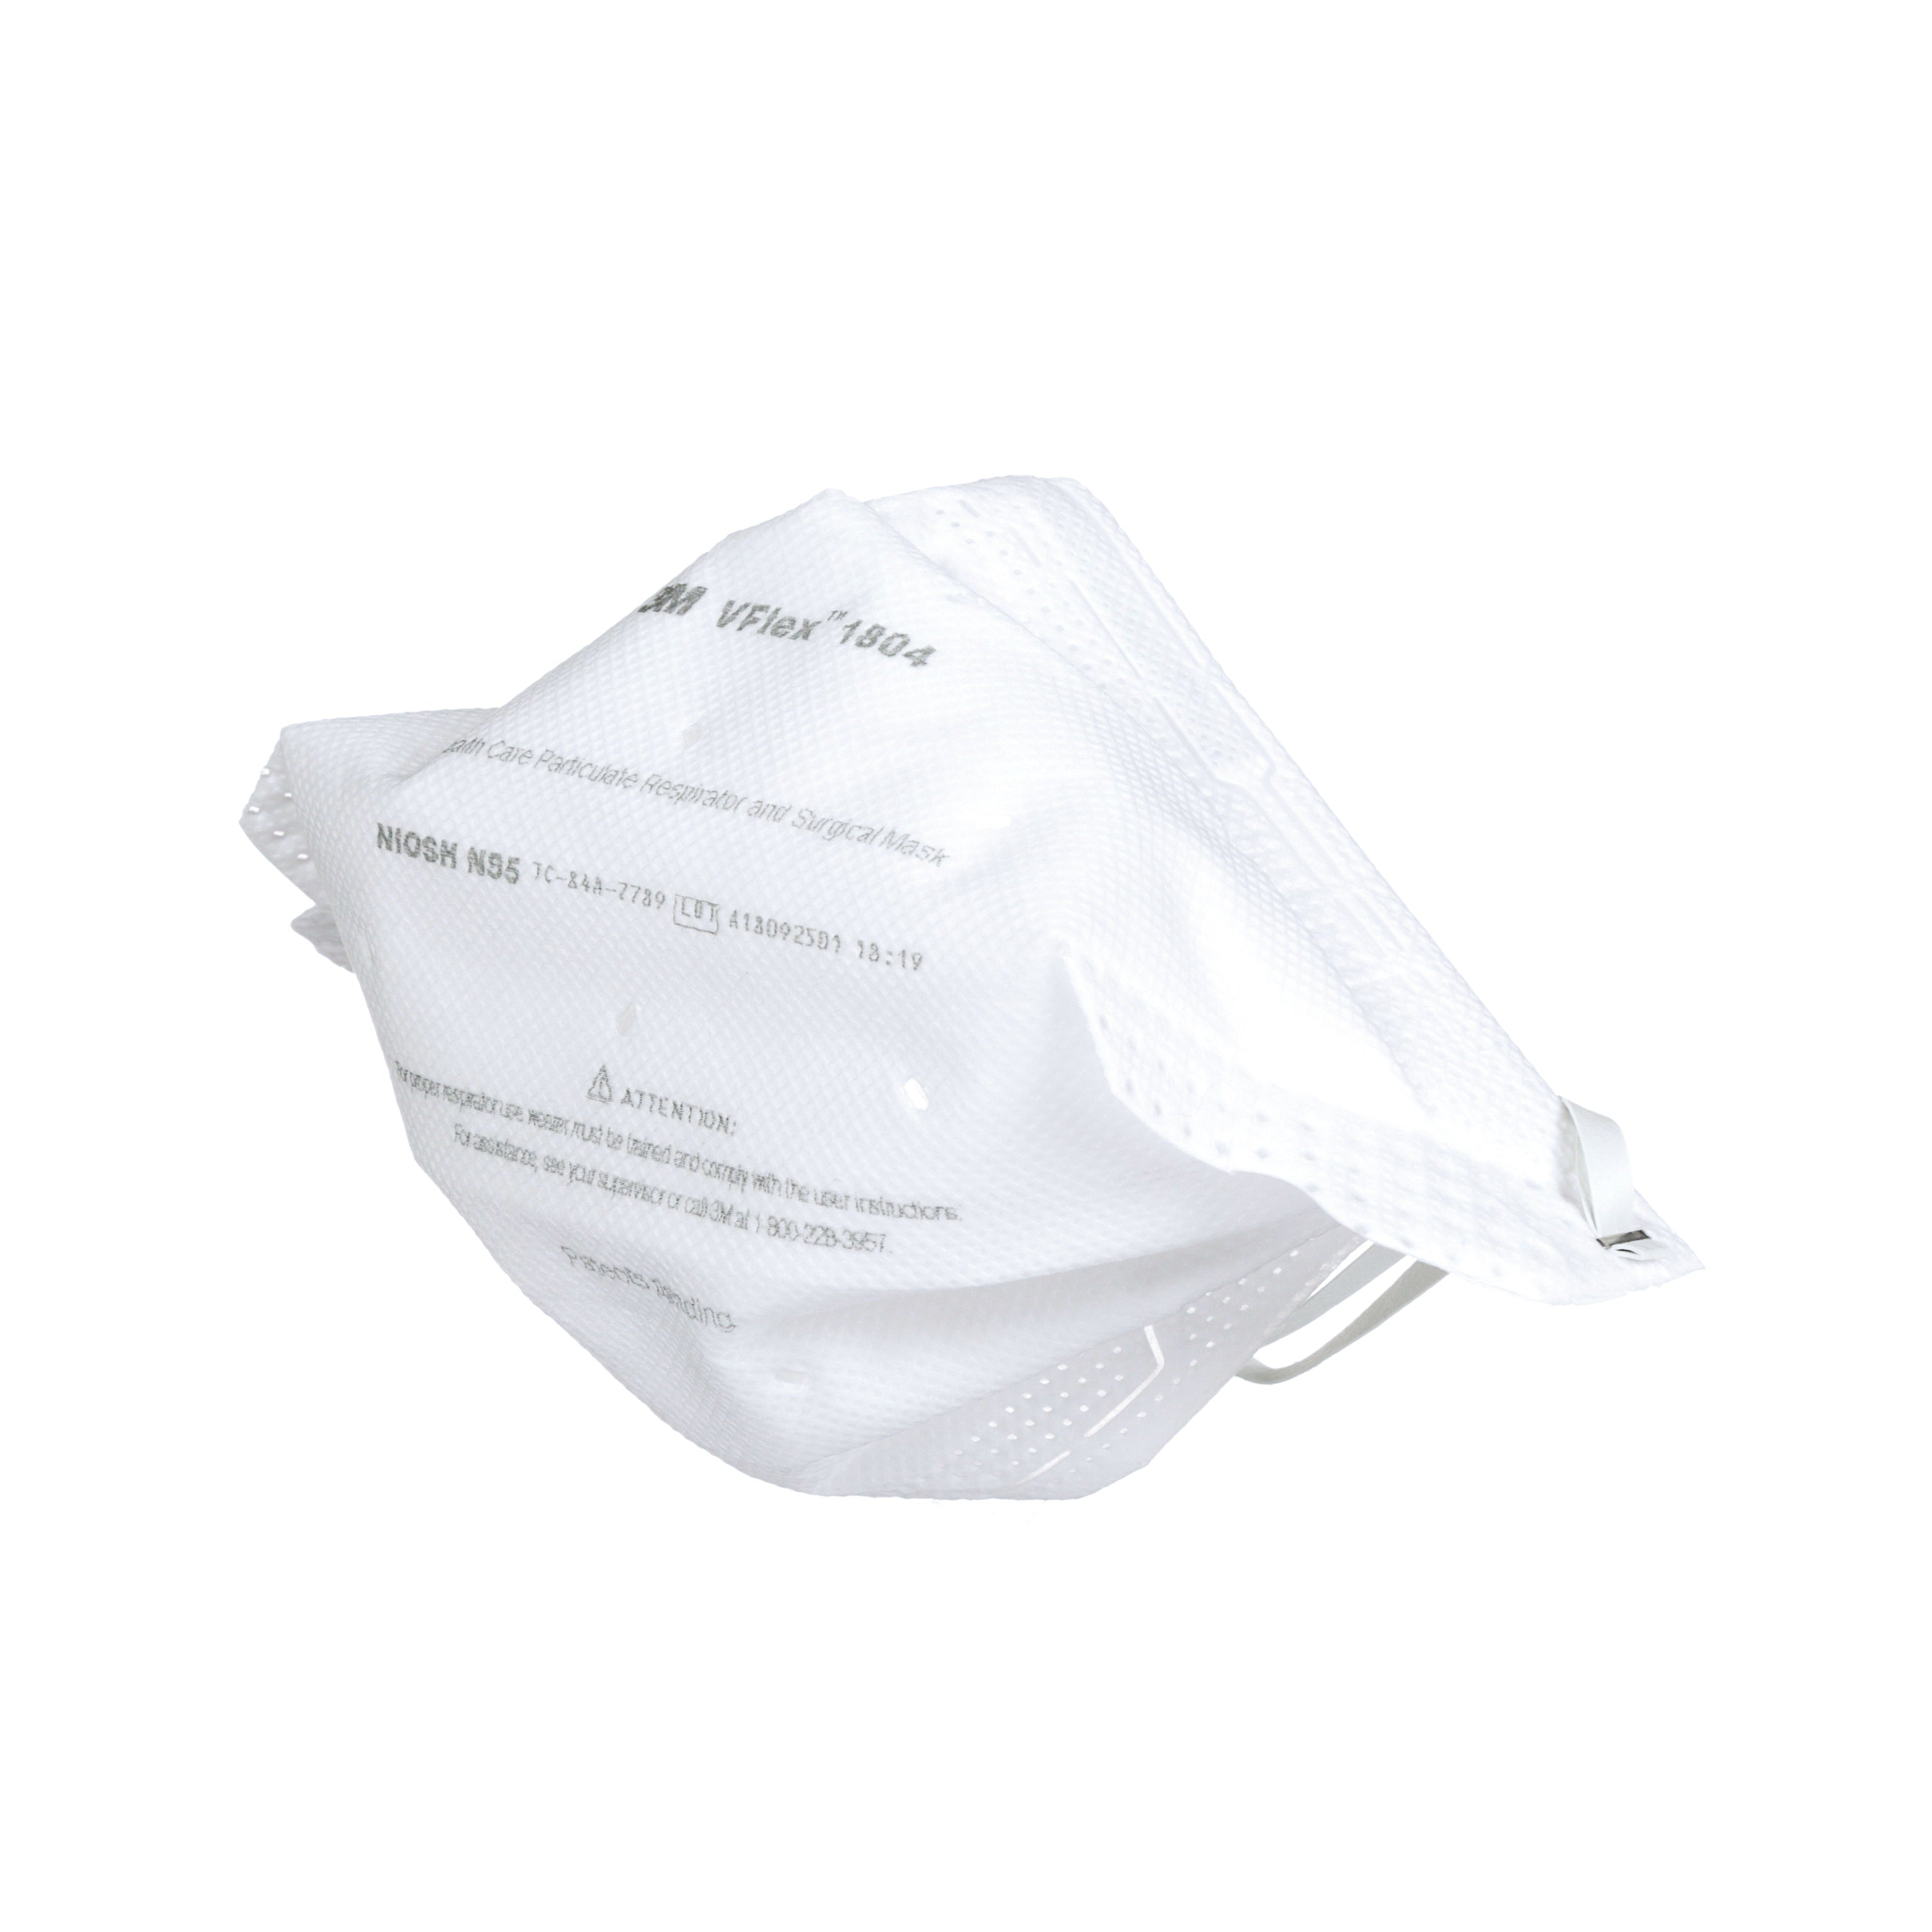 3M Canada Vflex 1804 Healthcare Surgical N95 respirator mask side view 2